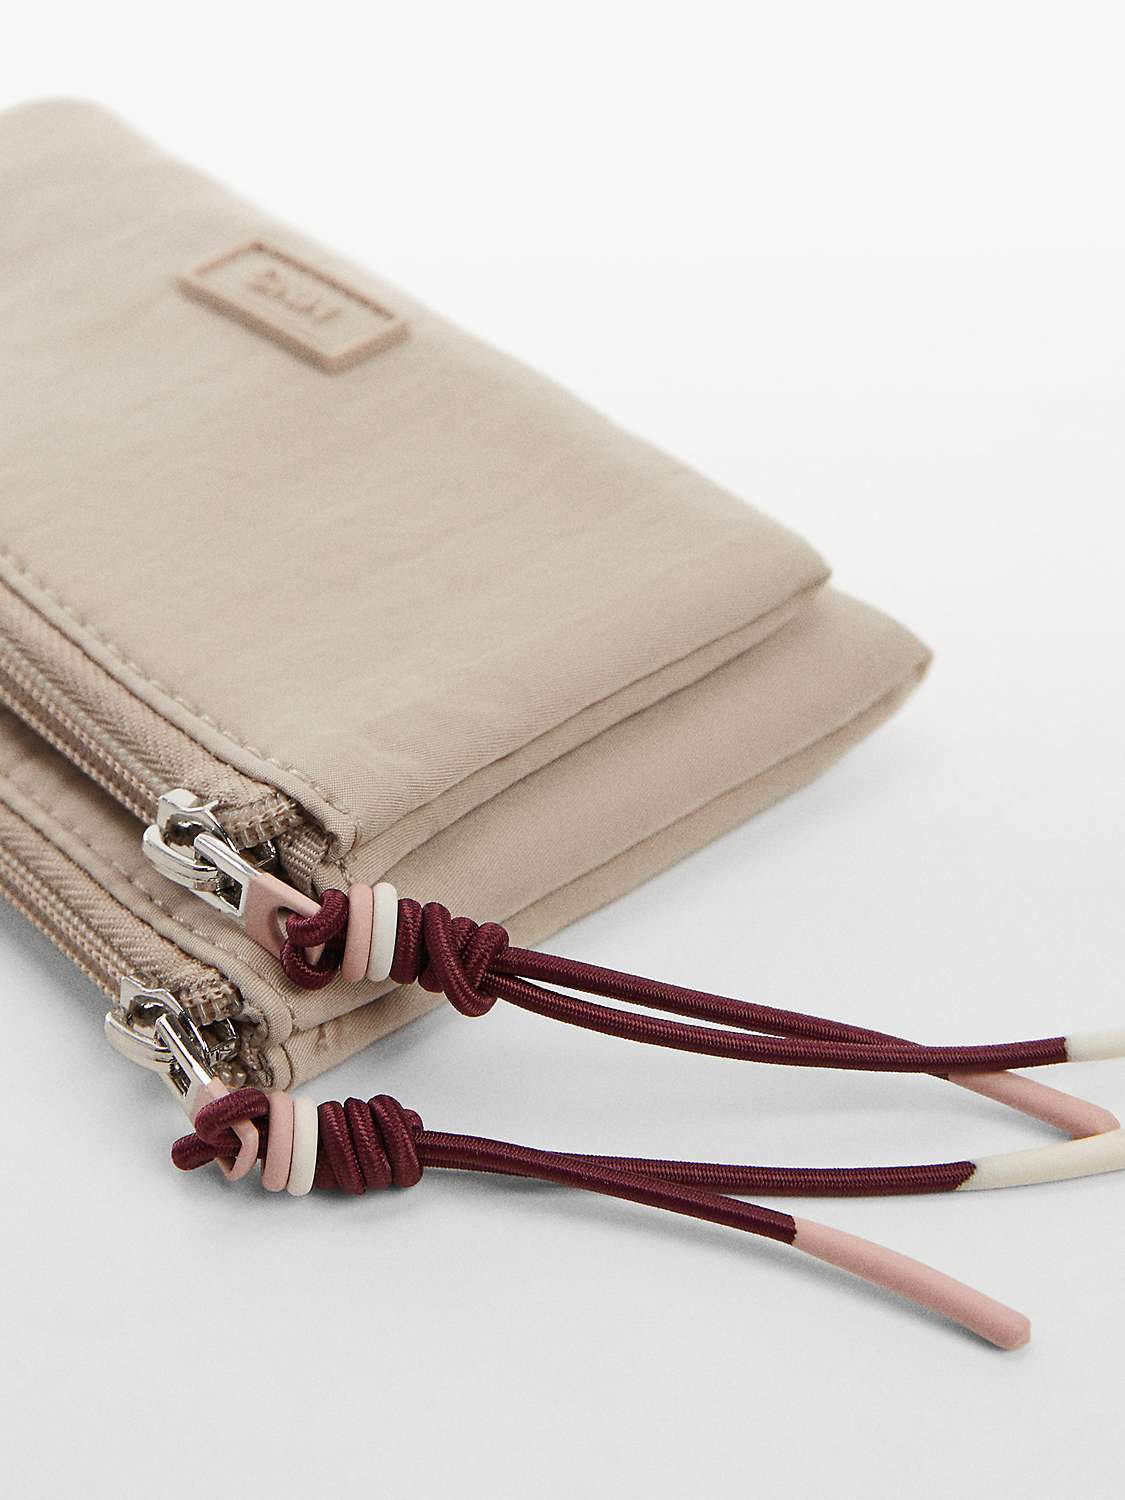 Buy Mango Sito Coin Purse, Natural White Online at johnlewis.com